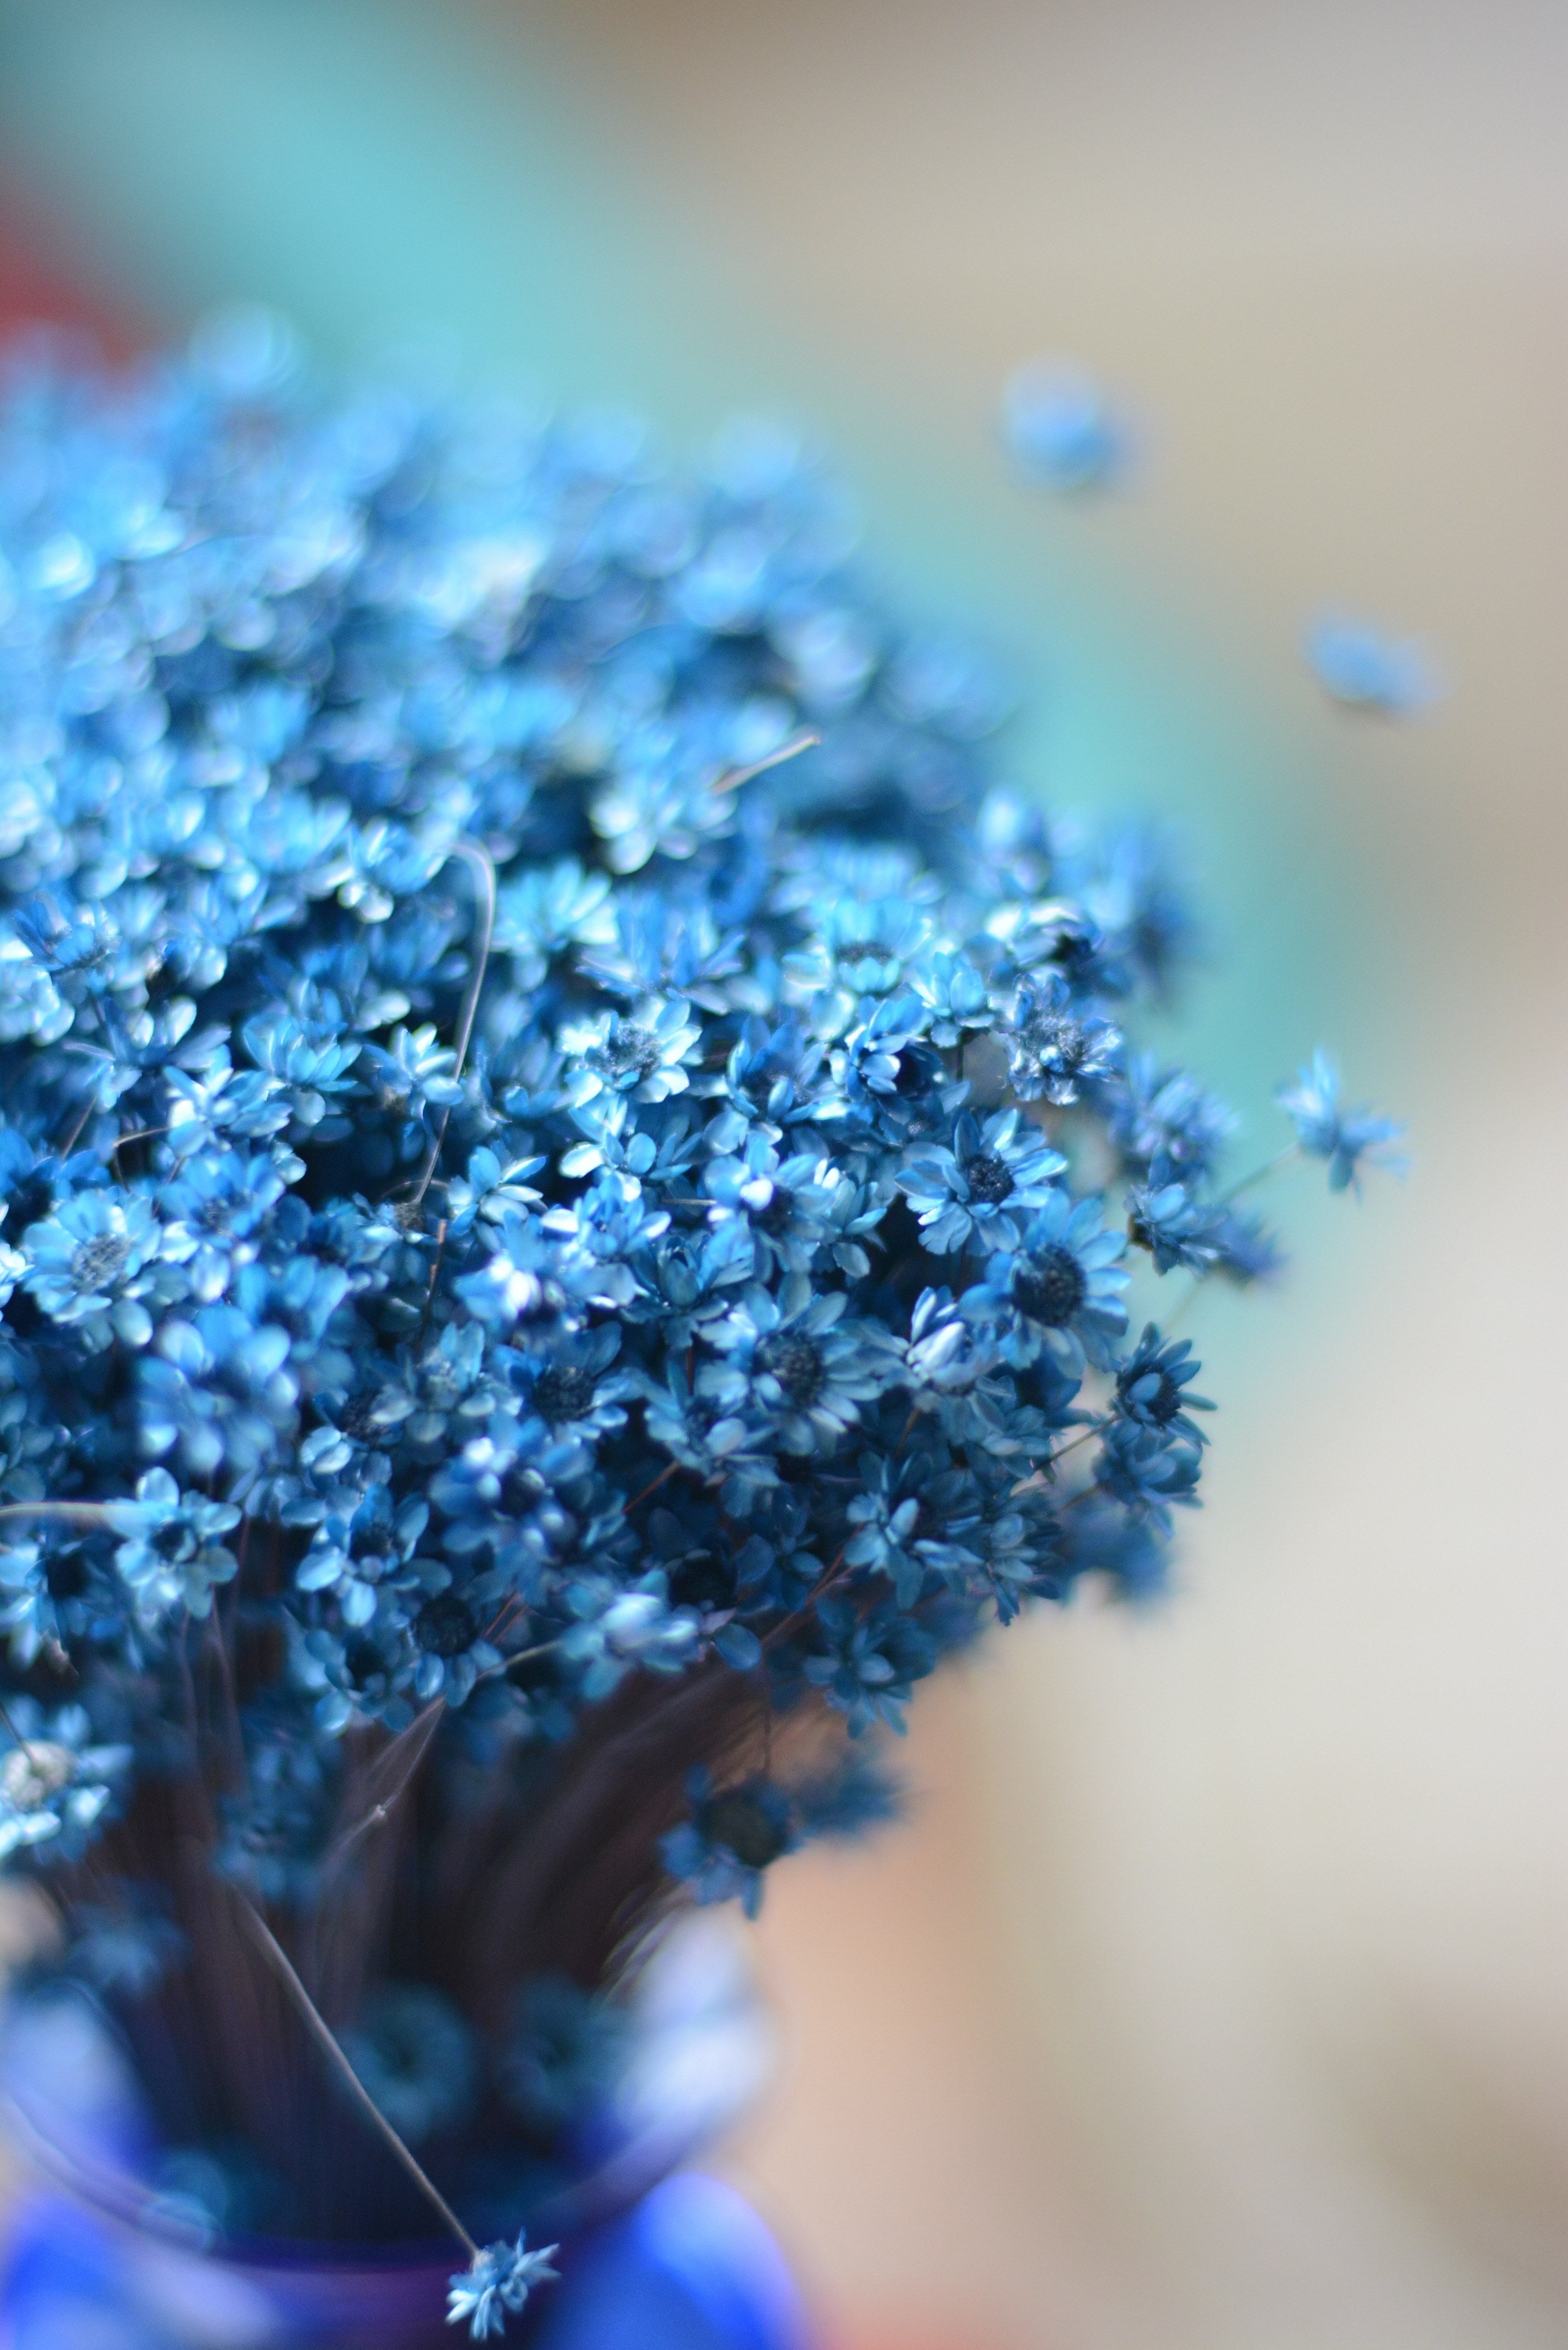 Blue, Flower, Istanbul, Green, Light, selective focus, close-up